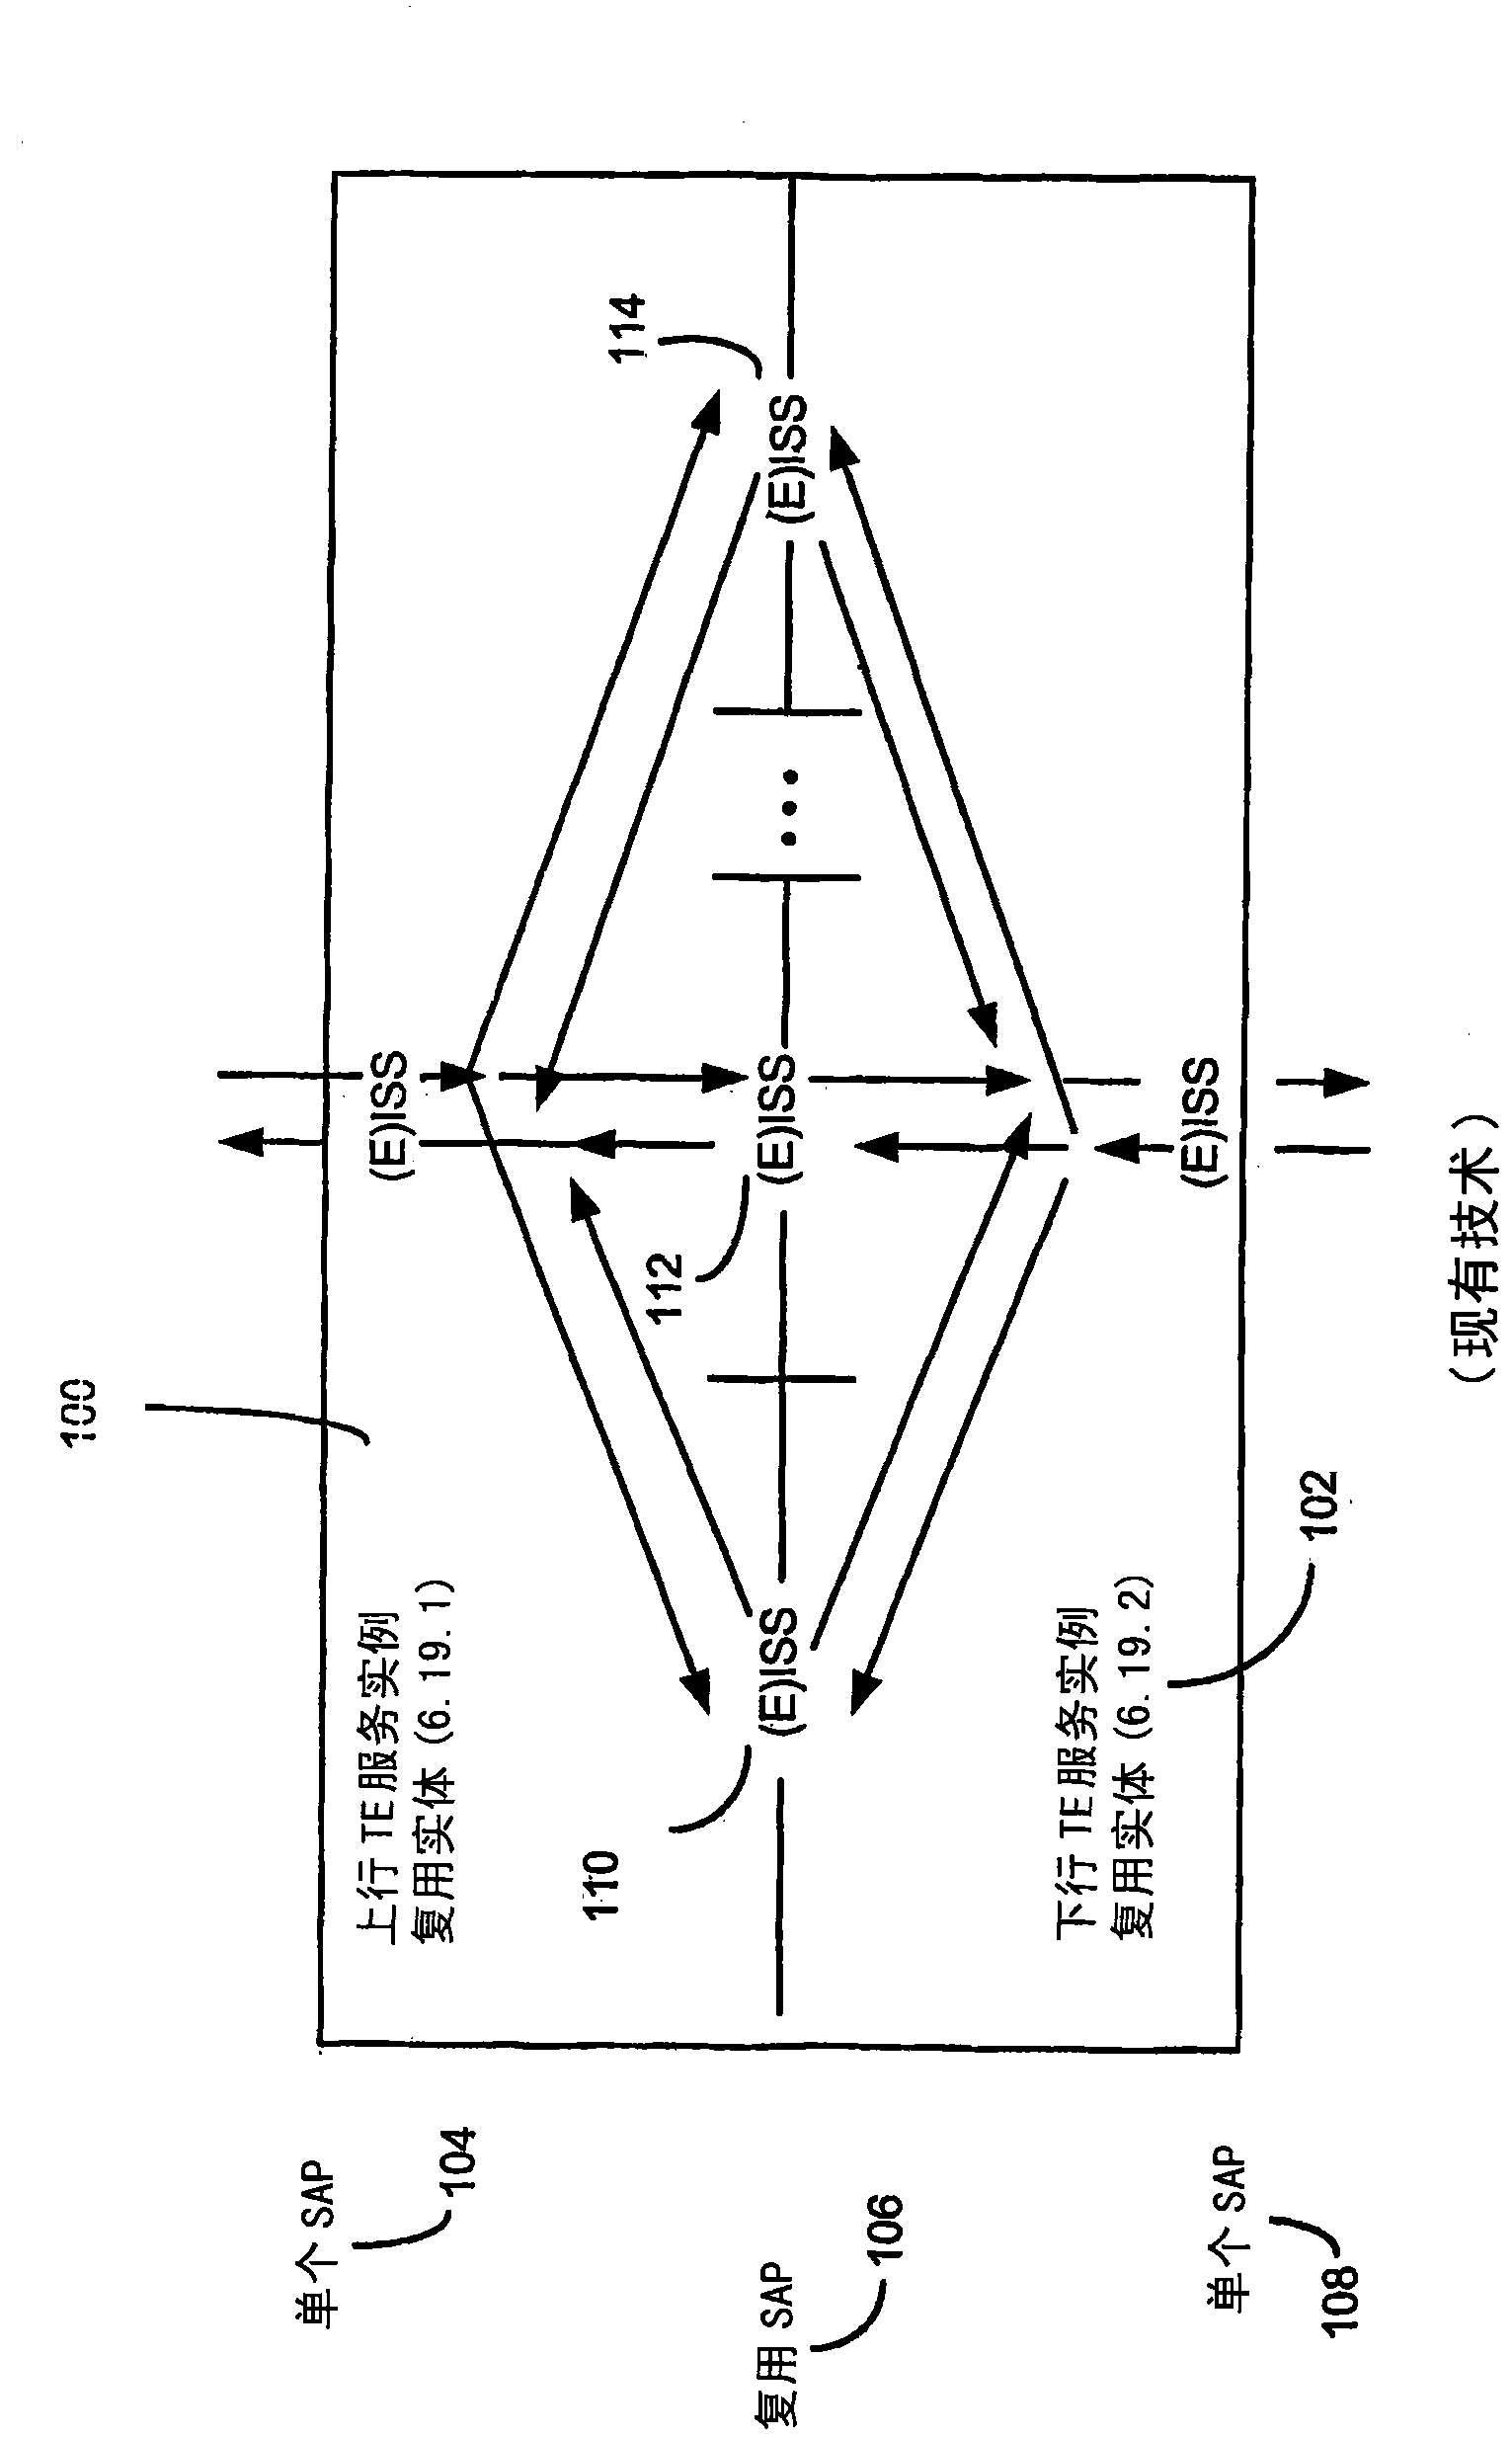 A system and method of demultiplexing provider backbone bridging traffic engineering instances